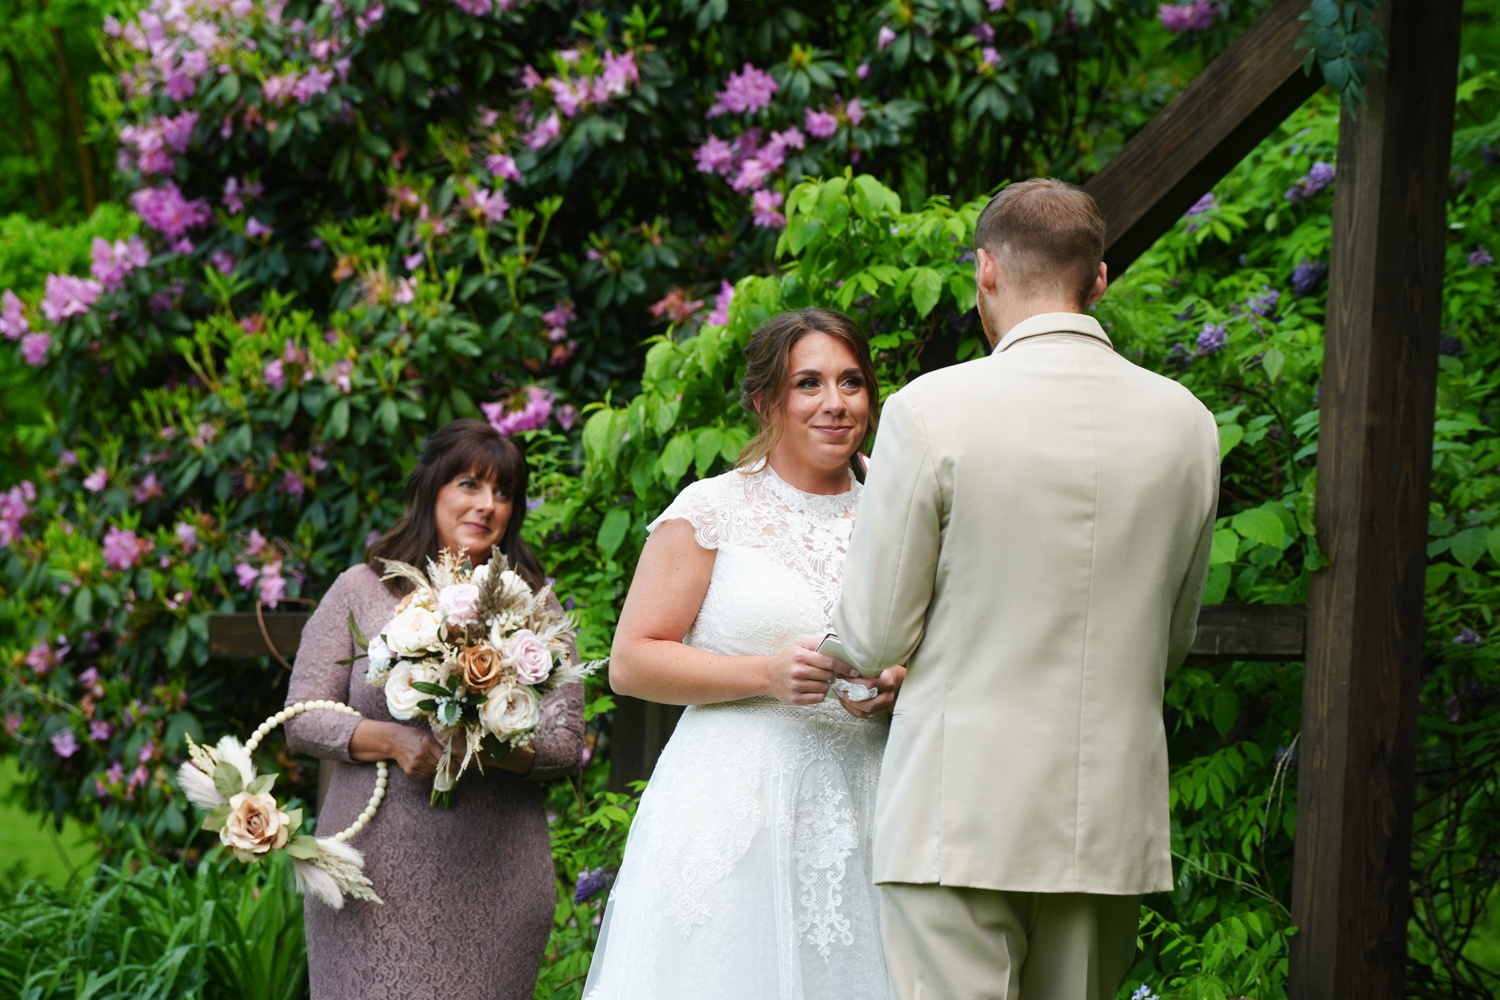 Bride saying her vows to her groom in the spring with purple rhododendrons in bloom and her mother watching lovingly from behind